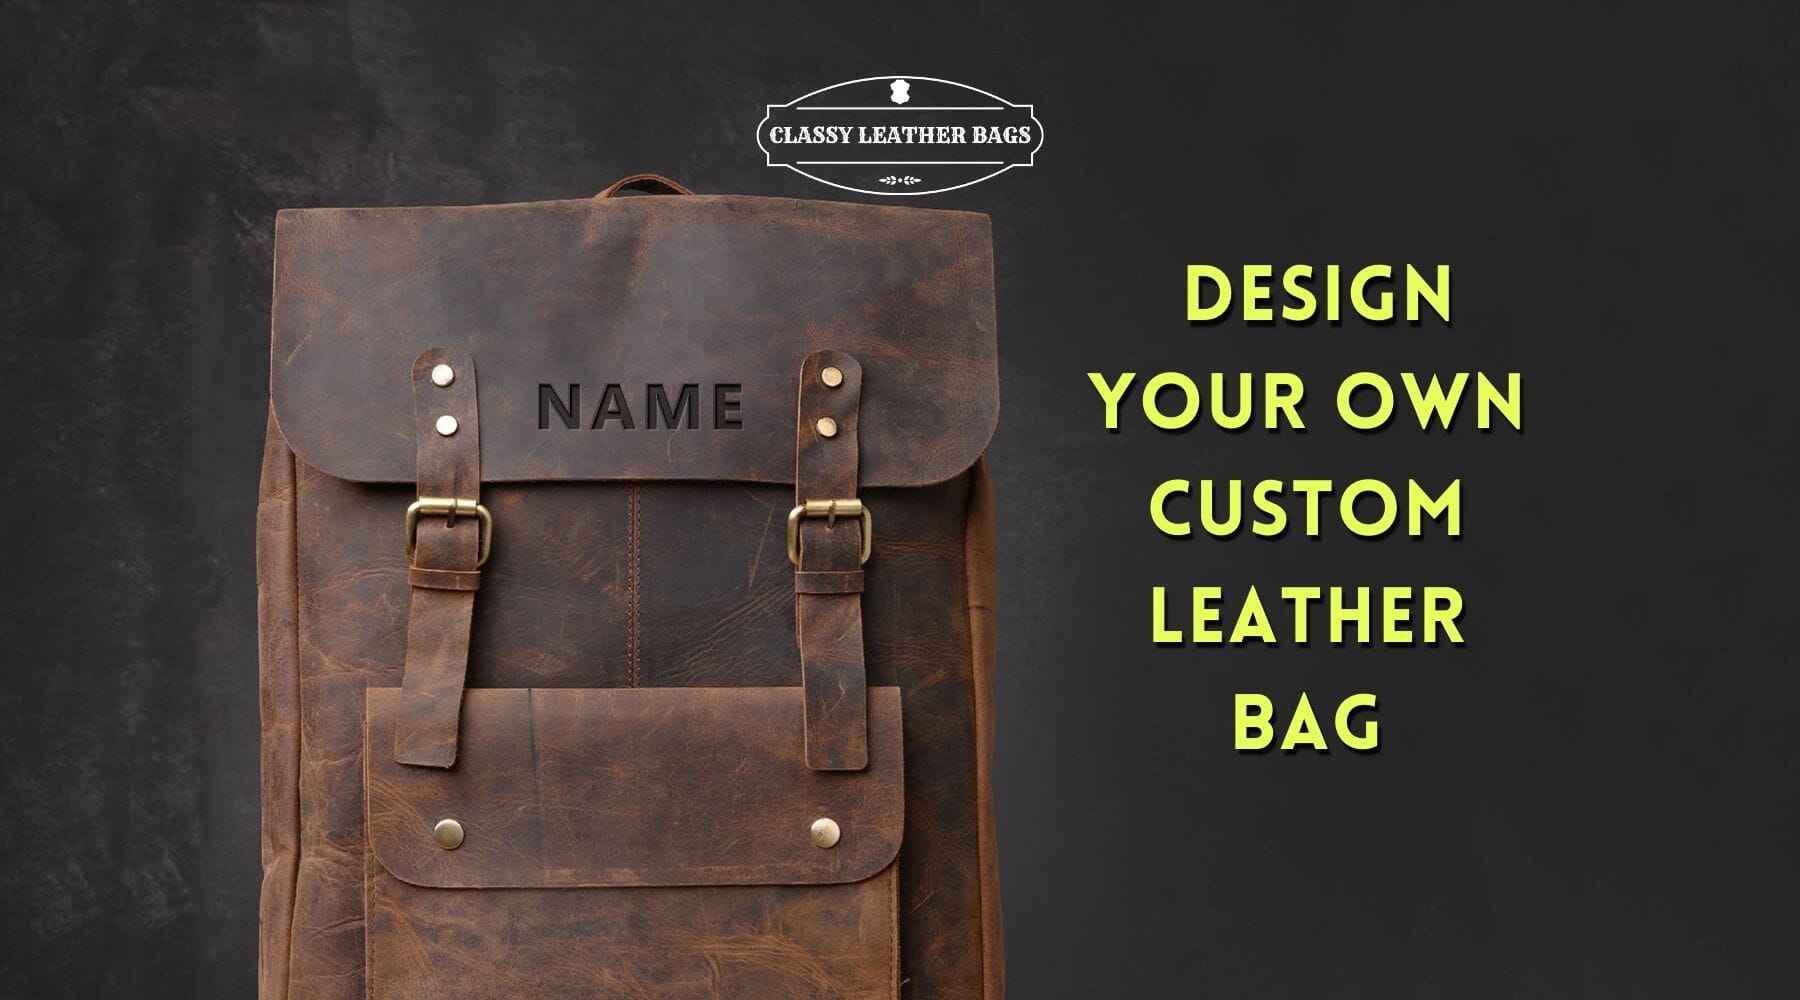 Custom Leather Bags - Design Your Own Bags